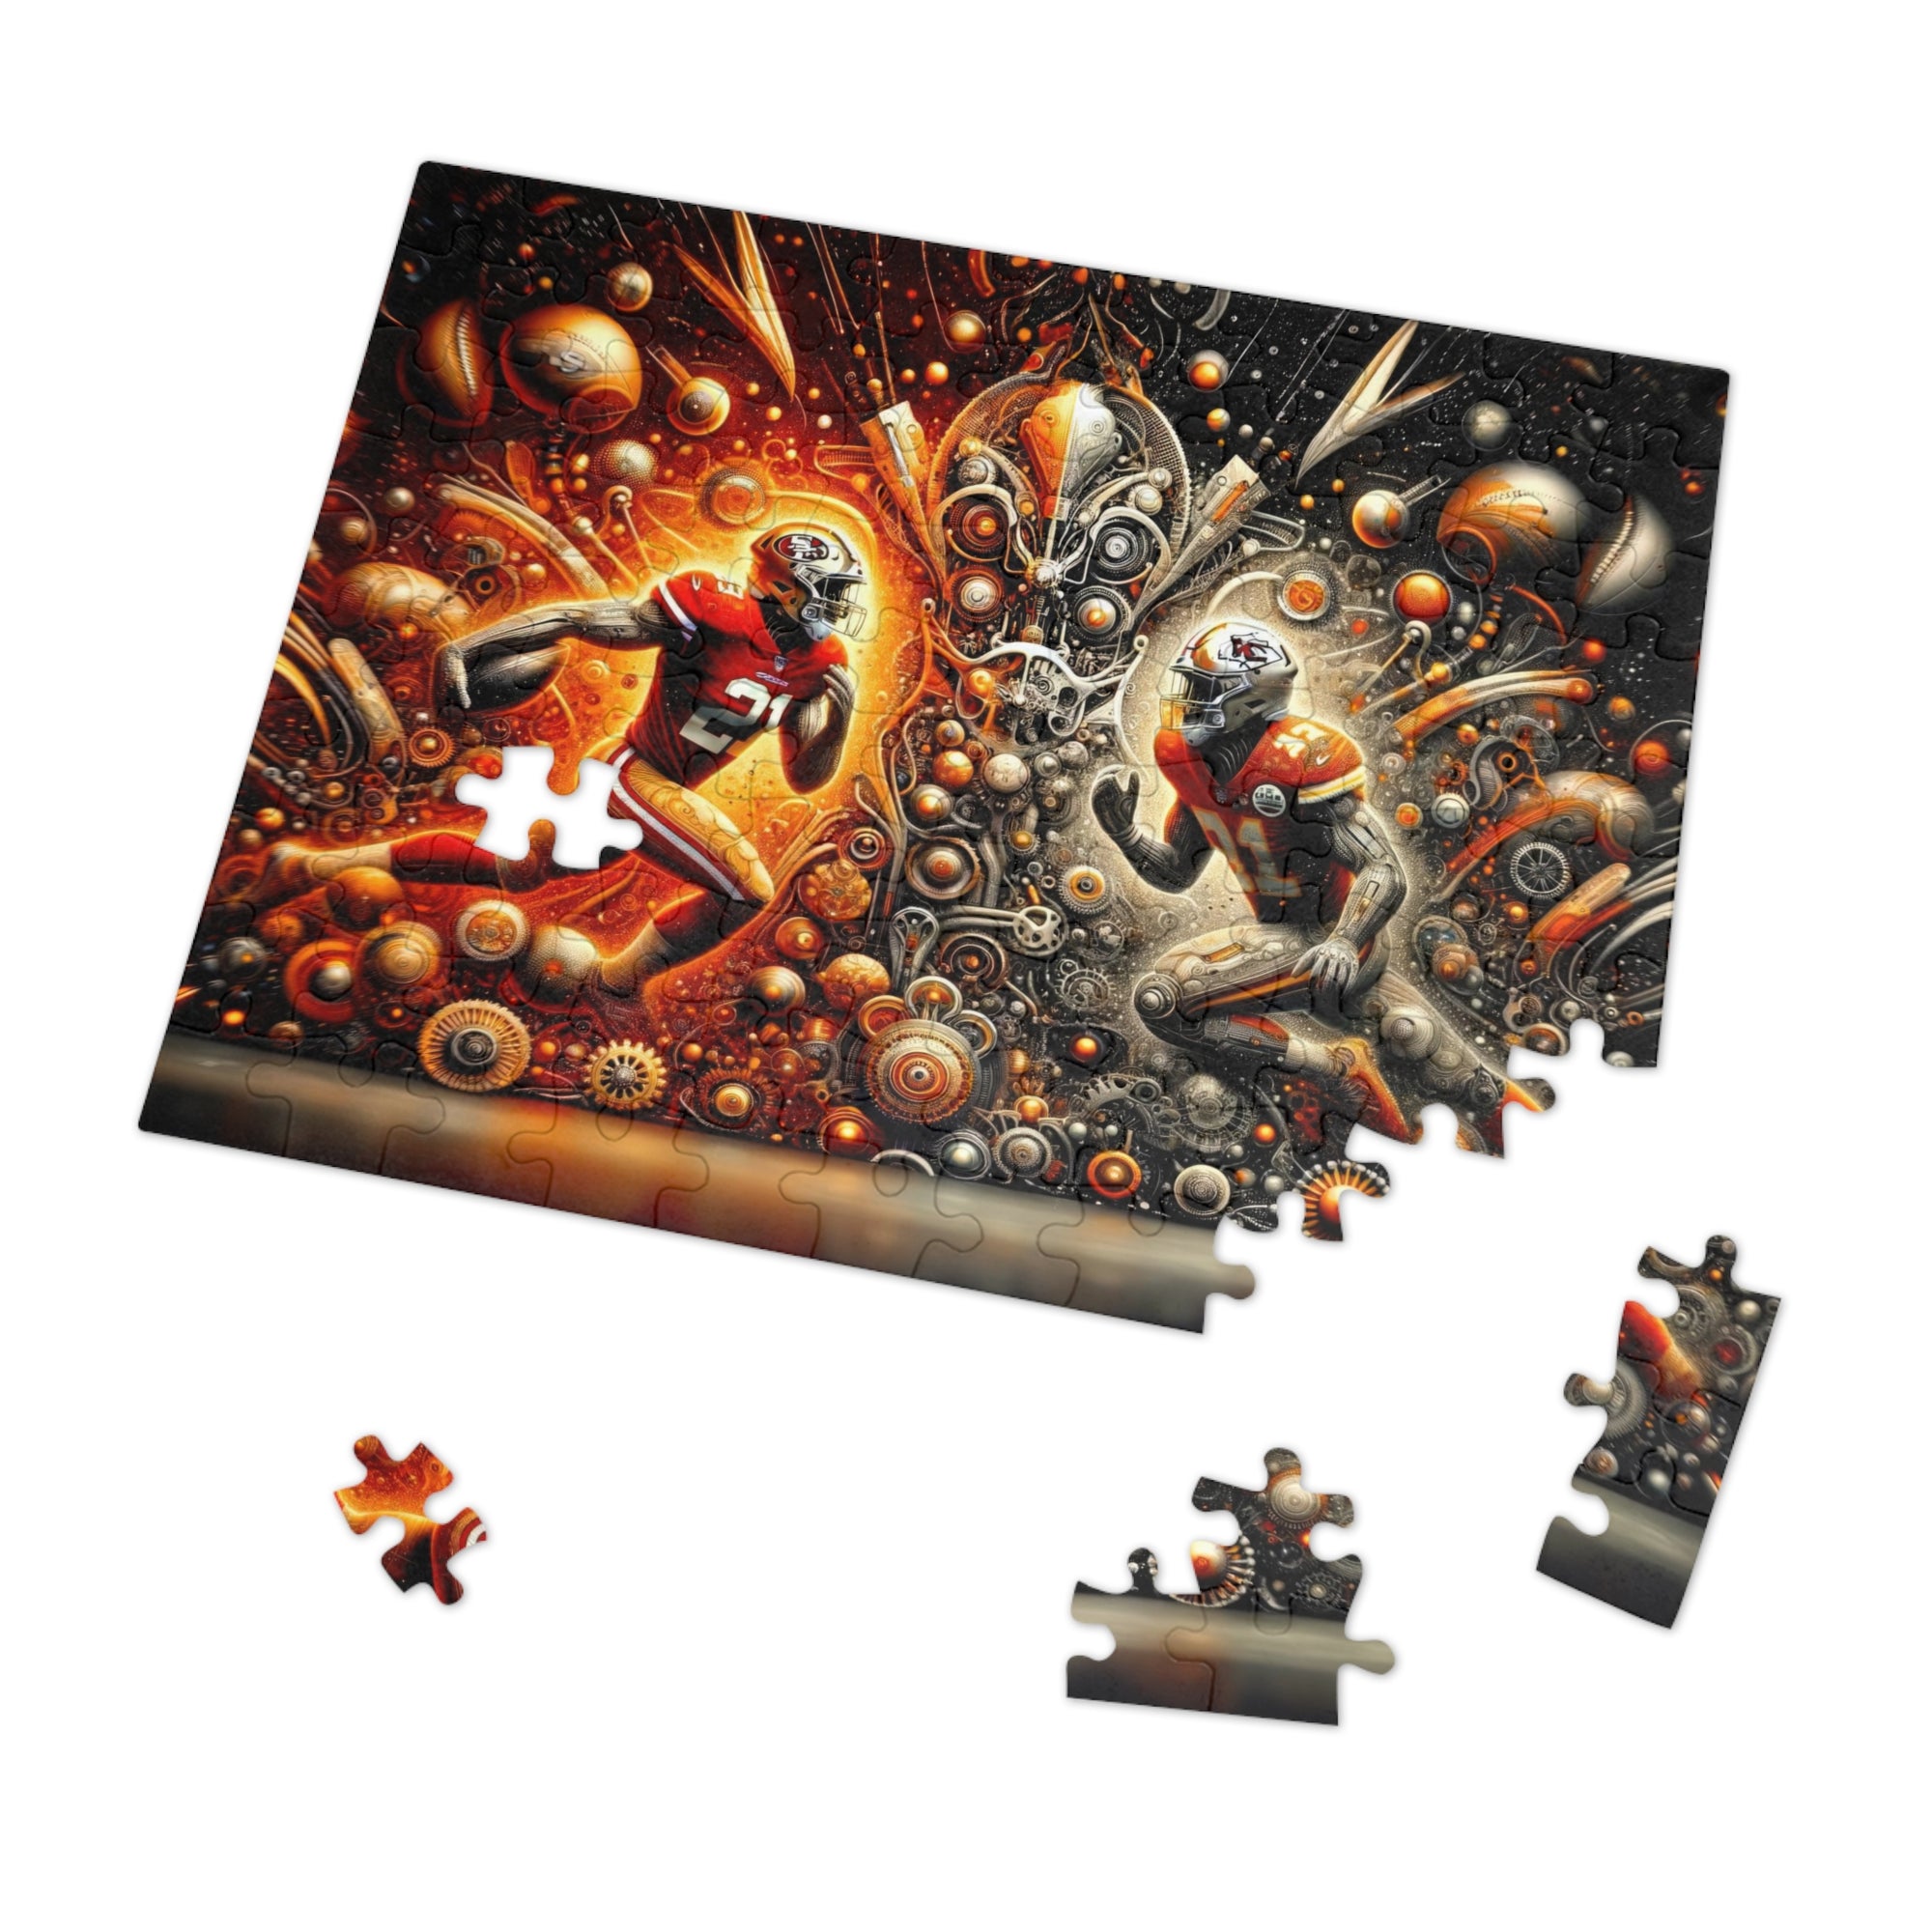 Ironclad Rivals Jigsaw Puzzle